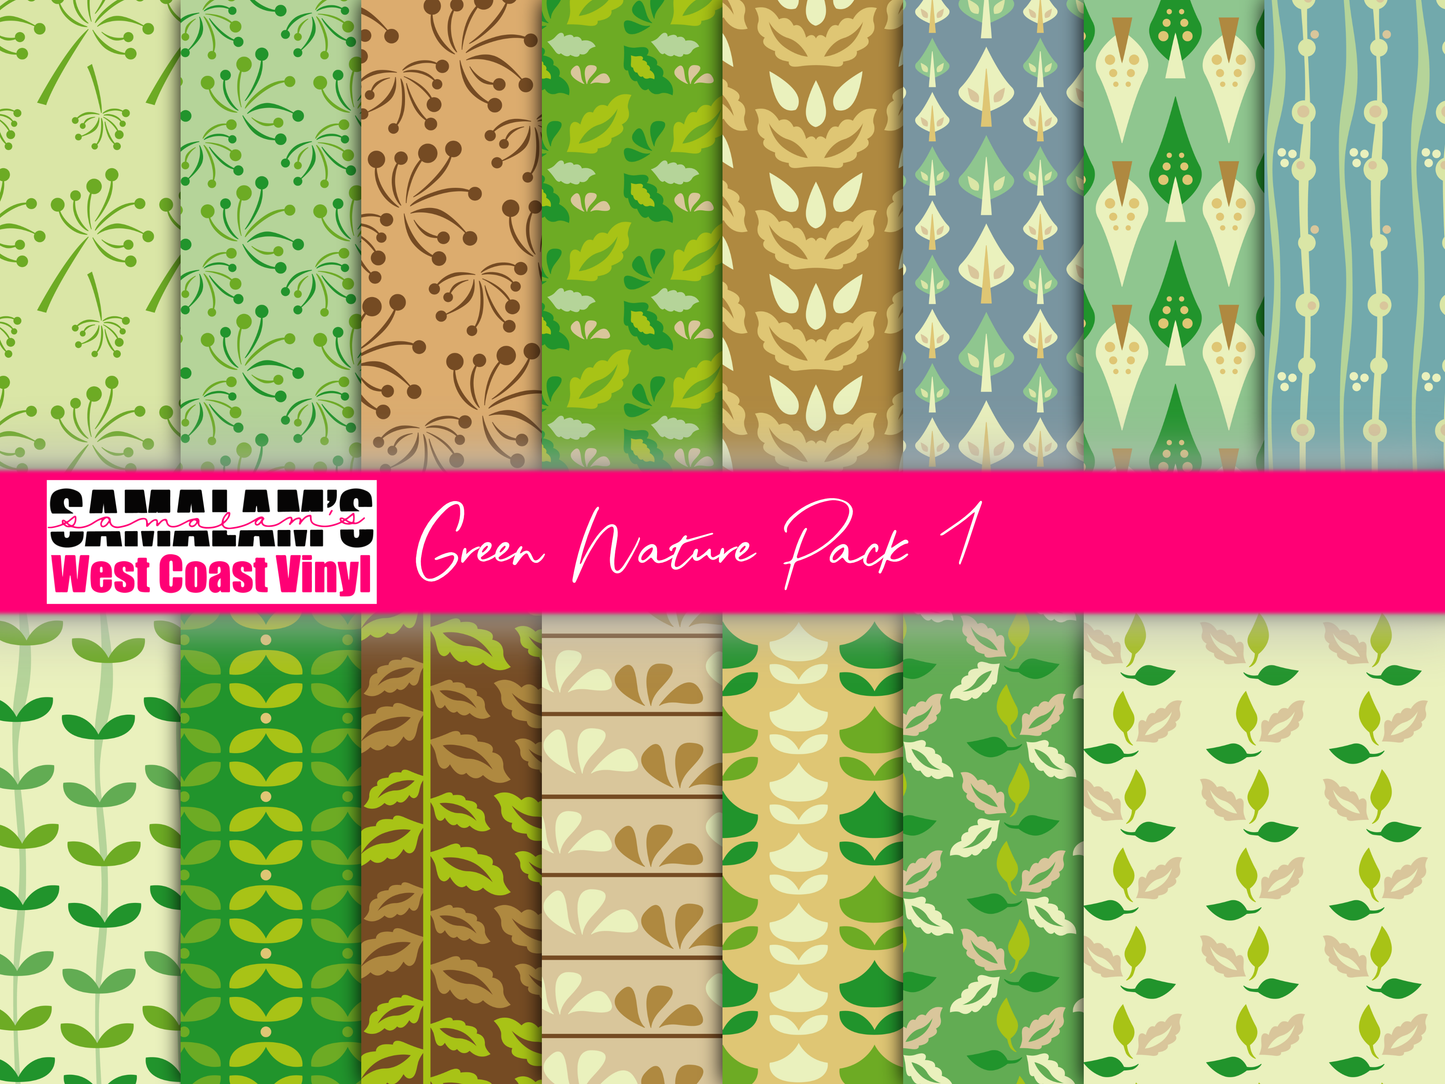 Green Nature - Pack 1